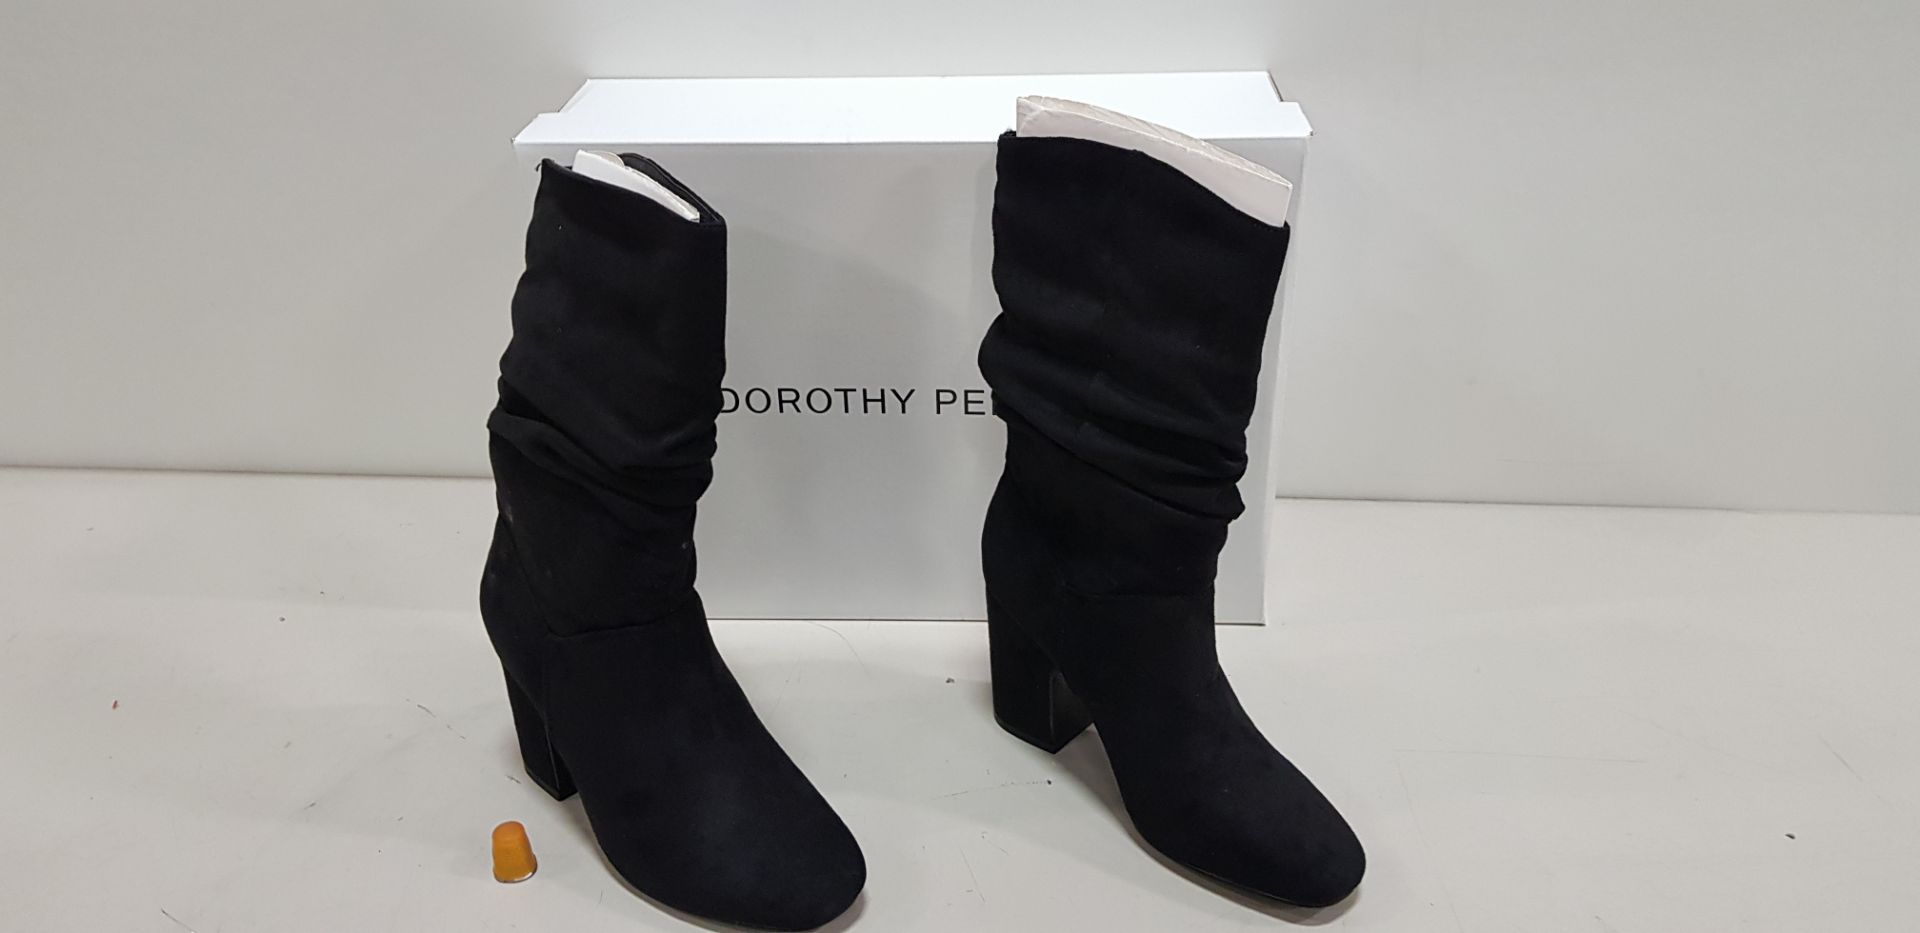 20 X BRAND NEW DOROTHY PERKINS KIND RUCHED BLACK MIDI BOOTS IN VARIOUS SIZES RRP-£40.00 PP TOTAL